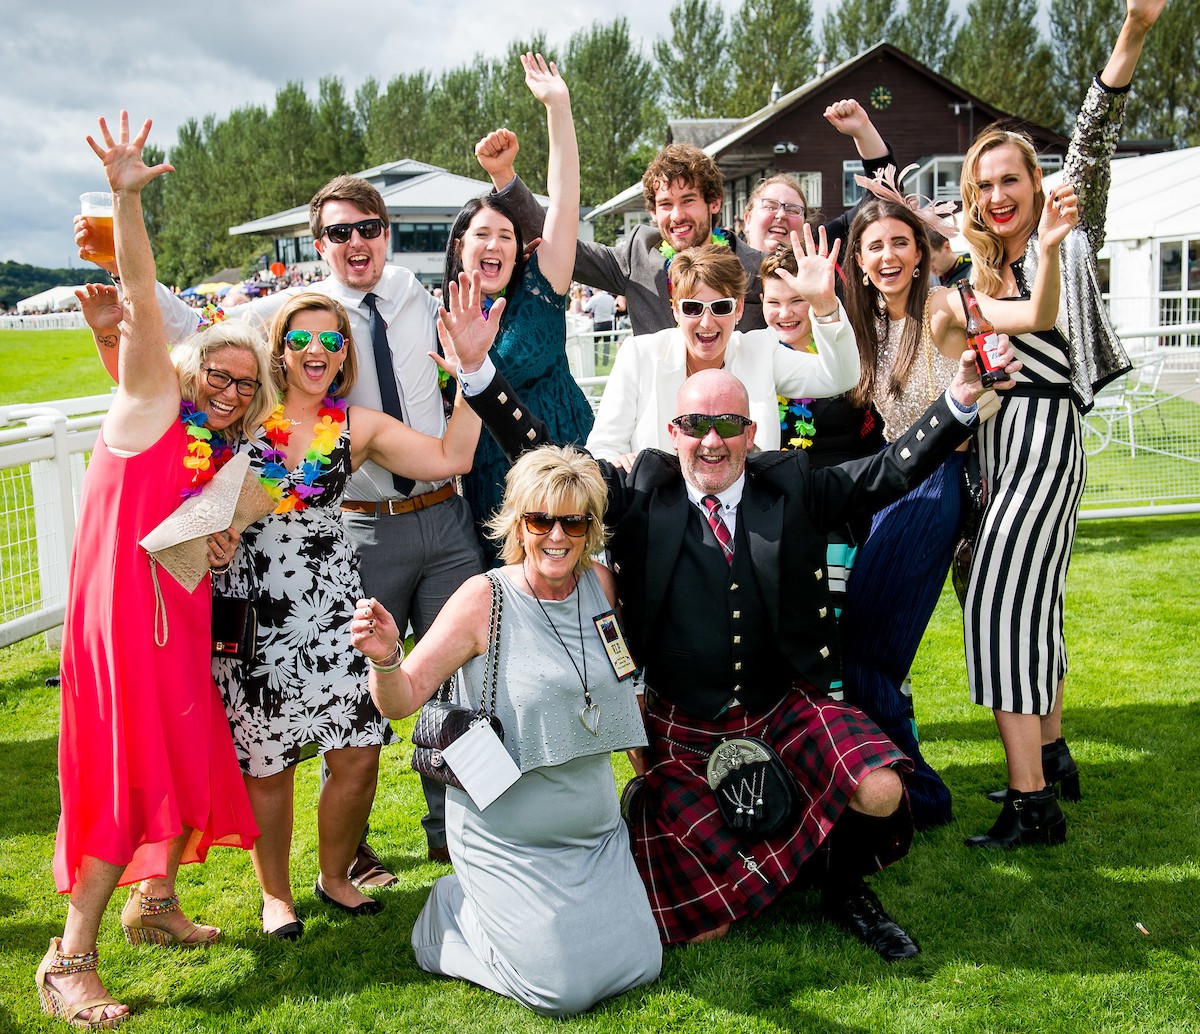 The biggest crowd of the season will flock to Perth Racecourse for a mixture of first-class jump racing and brilliant summer entertainment